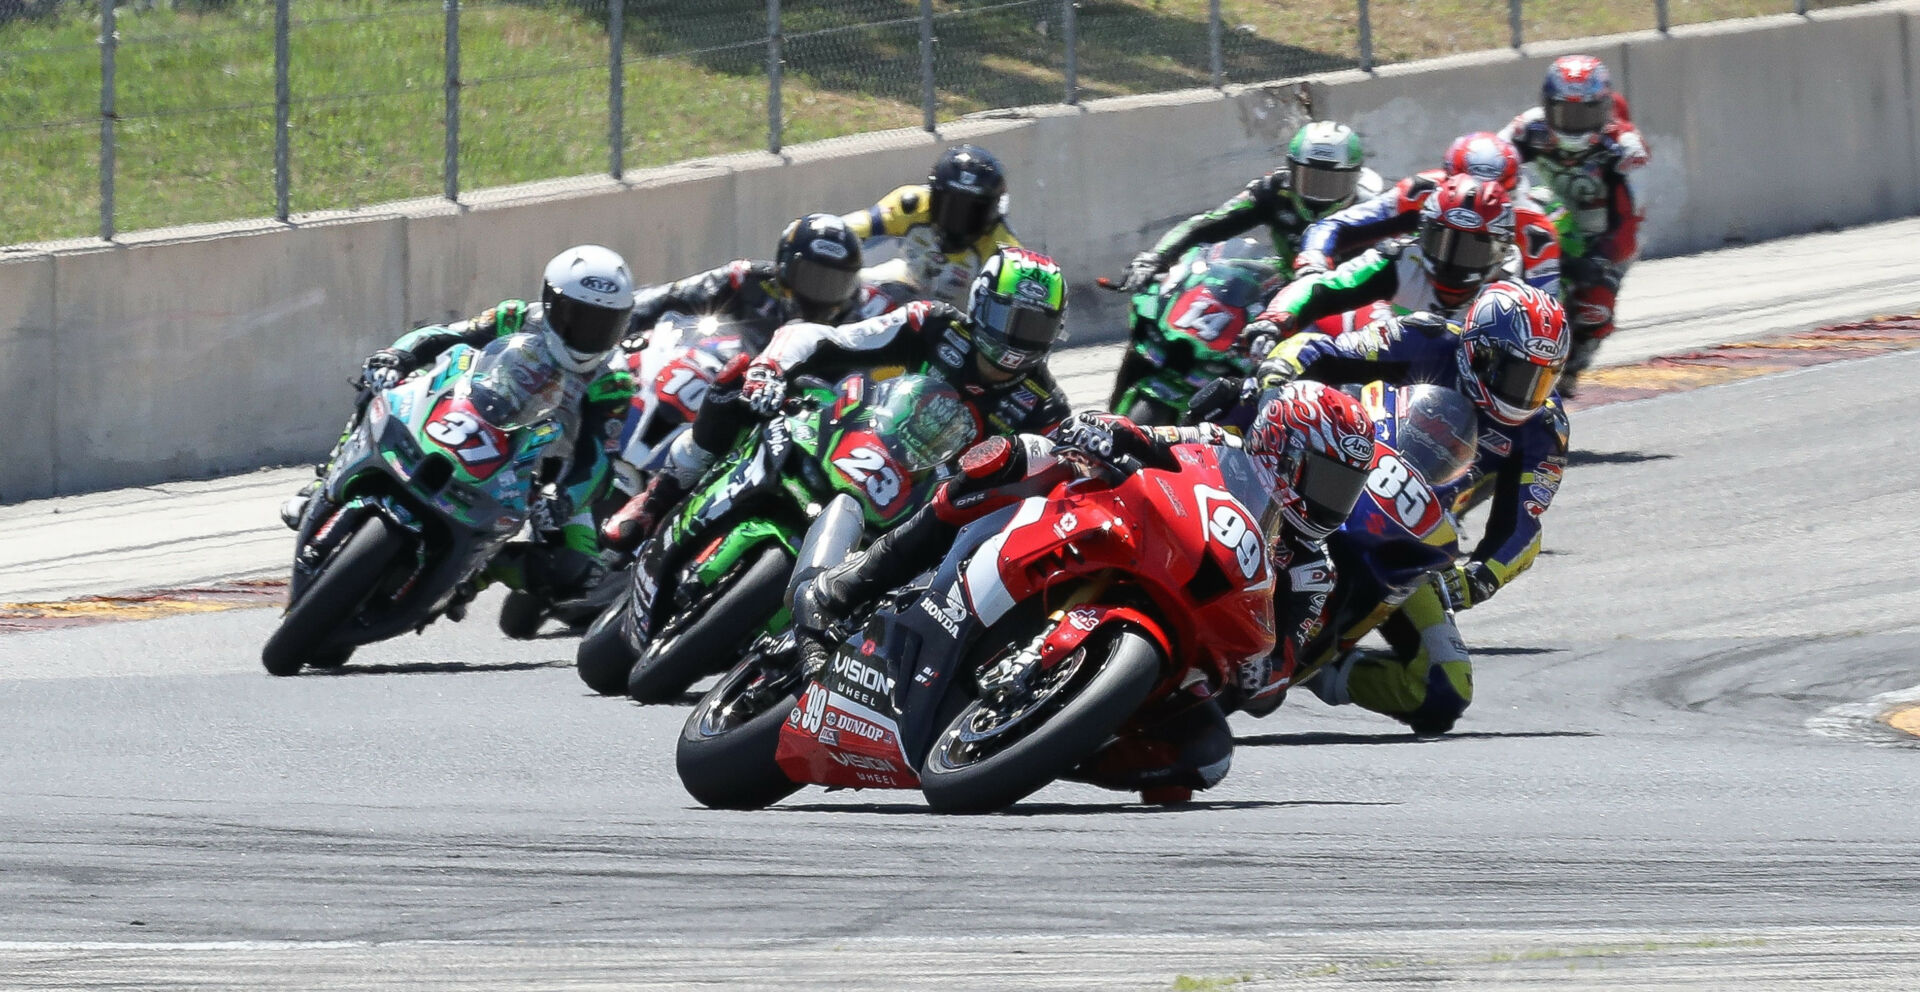 Geoff May (99), riding a Honda CBR1000RR-R Fireblade SP, leading a MotoAmerica Stock 1000 race at Road America in 2021. Photo by Brian J. Nelson.